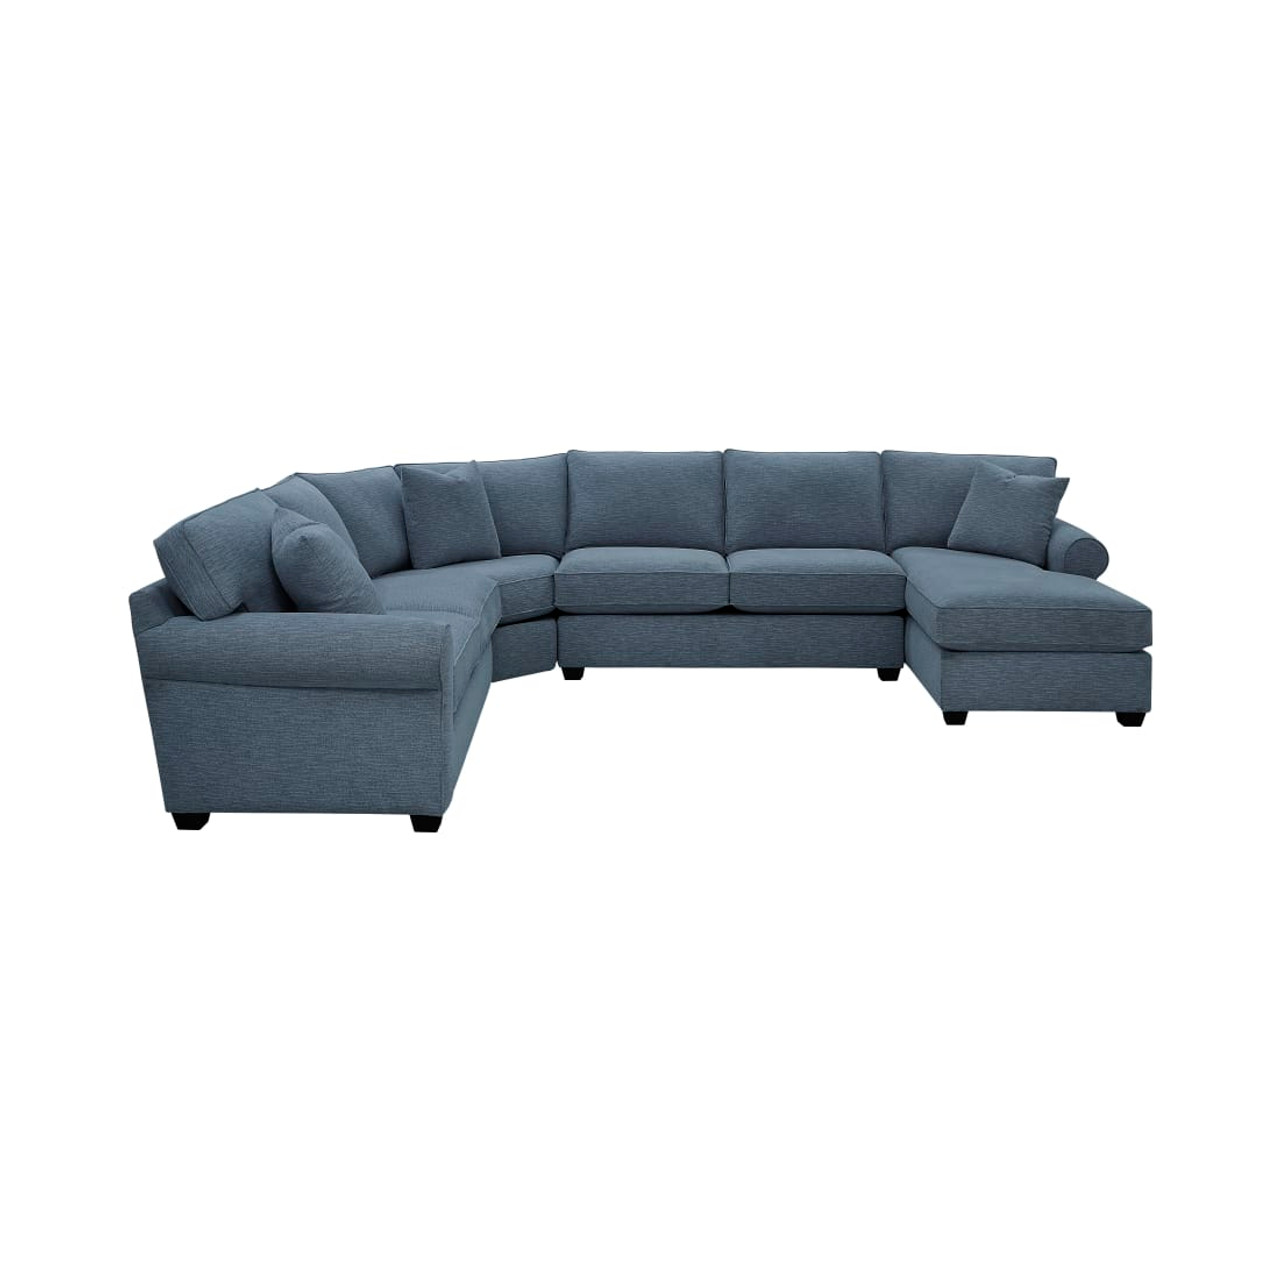 Crestview Rolled Arm Blue 4-pc sectional w/ right chaise